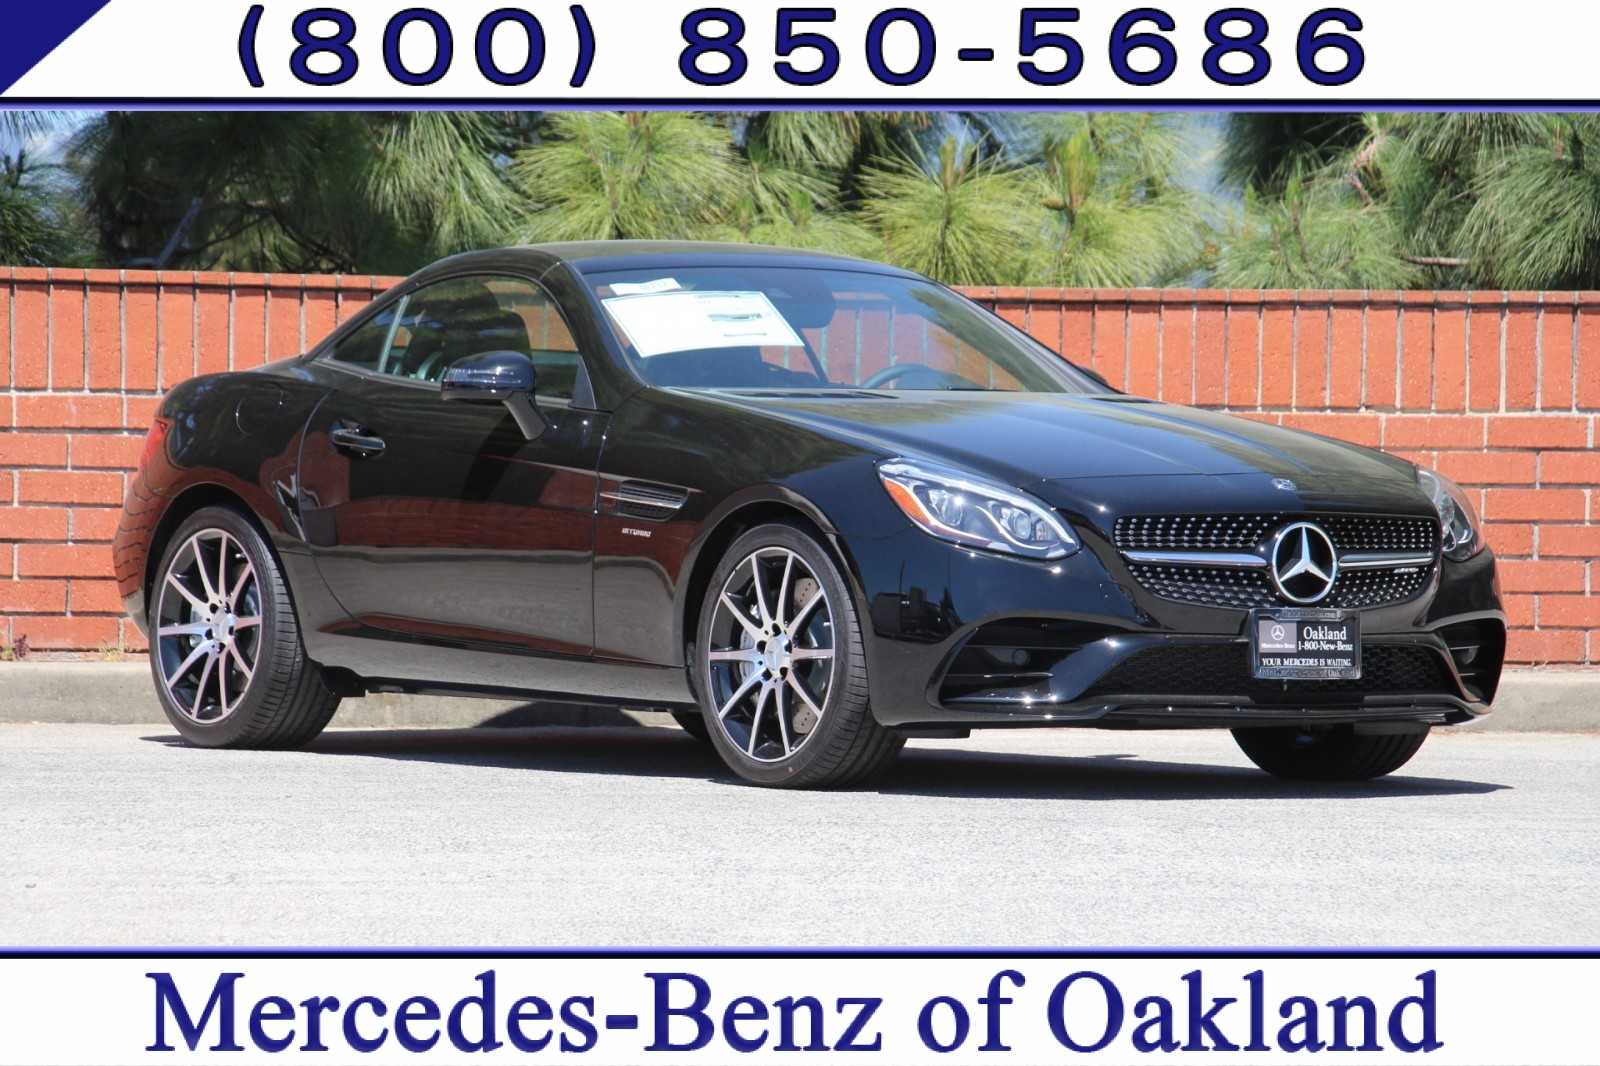 New 2019 Mercedes Benz Amg Slc 43 For Sale In Oakland Ca